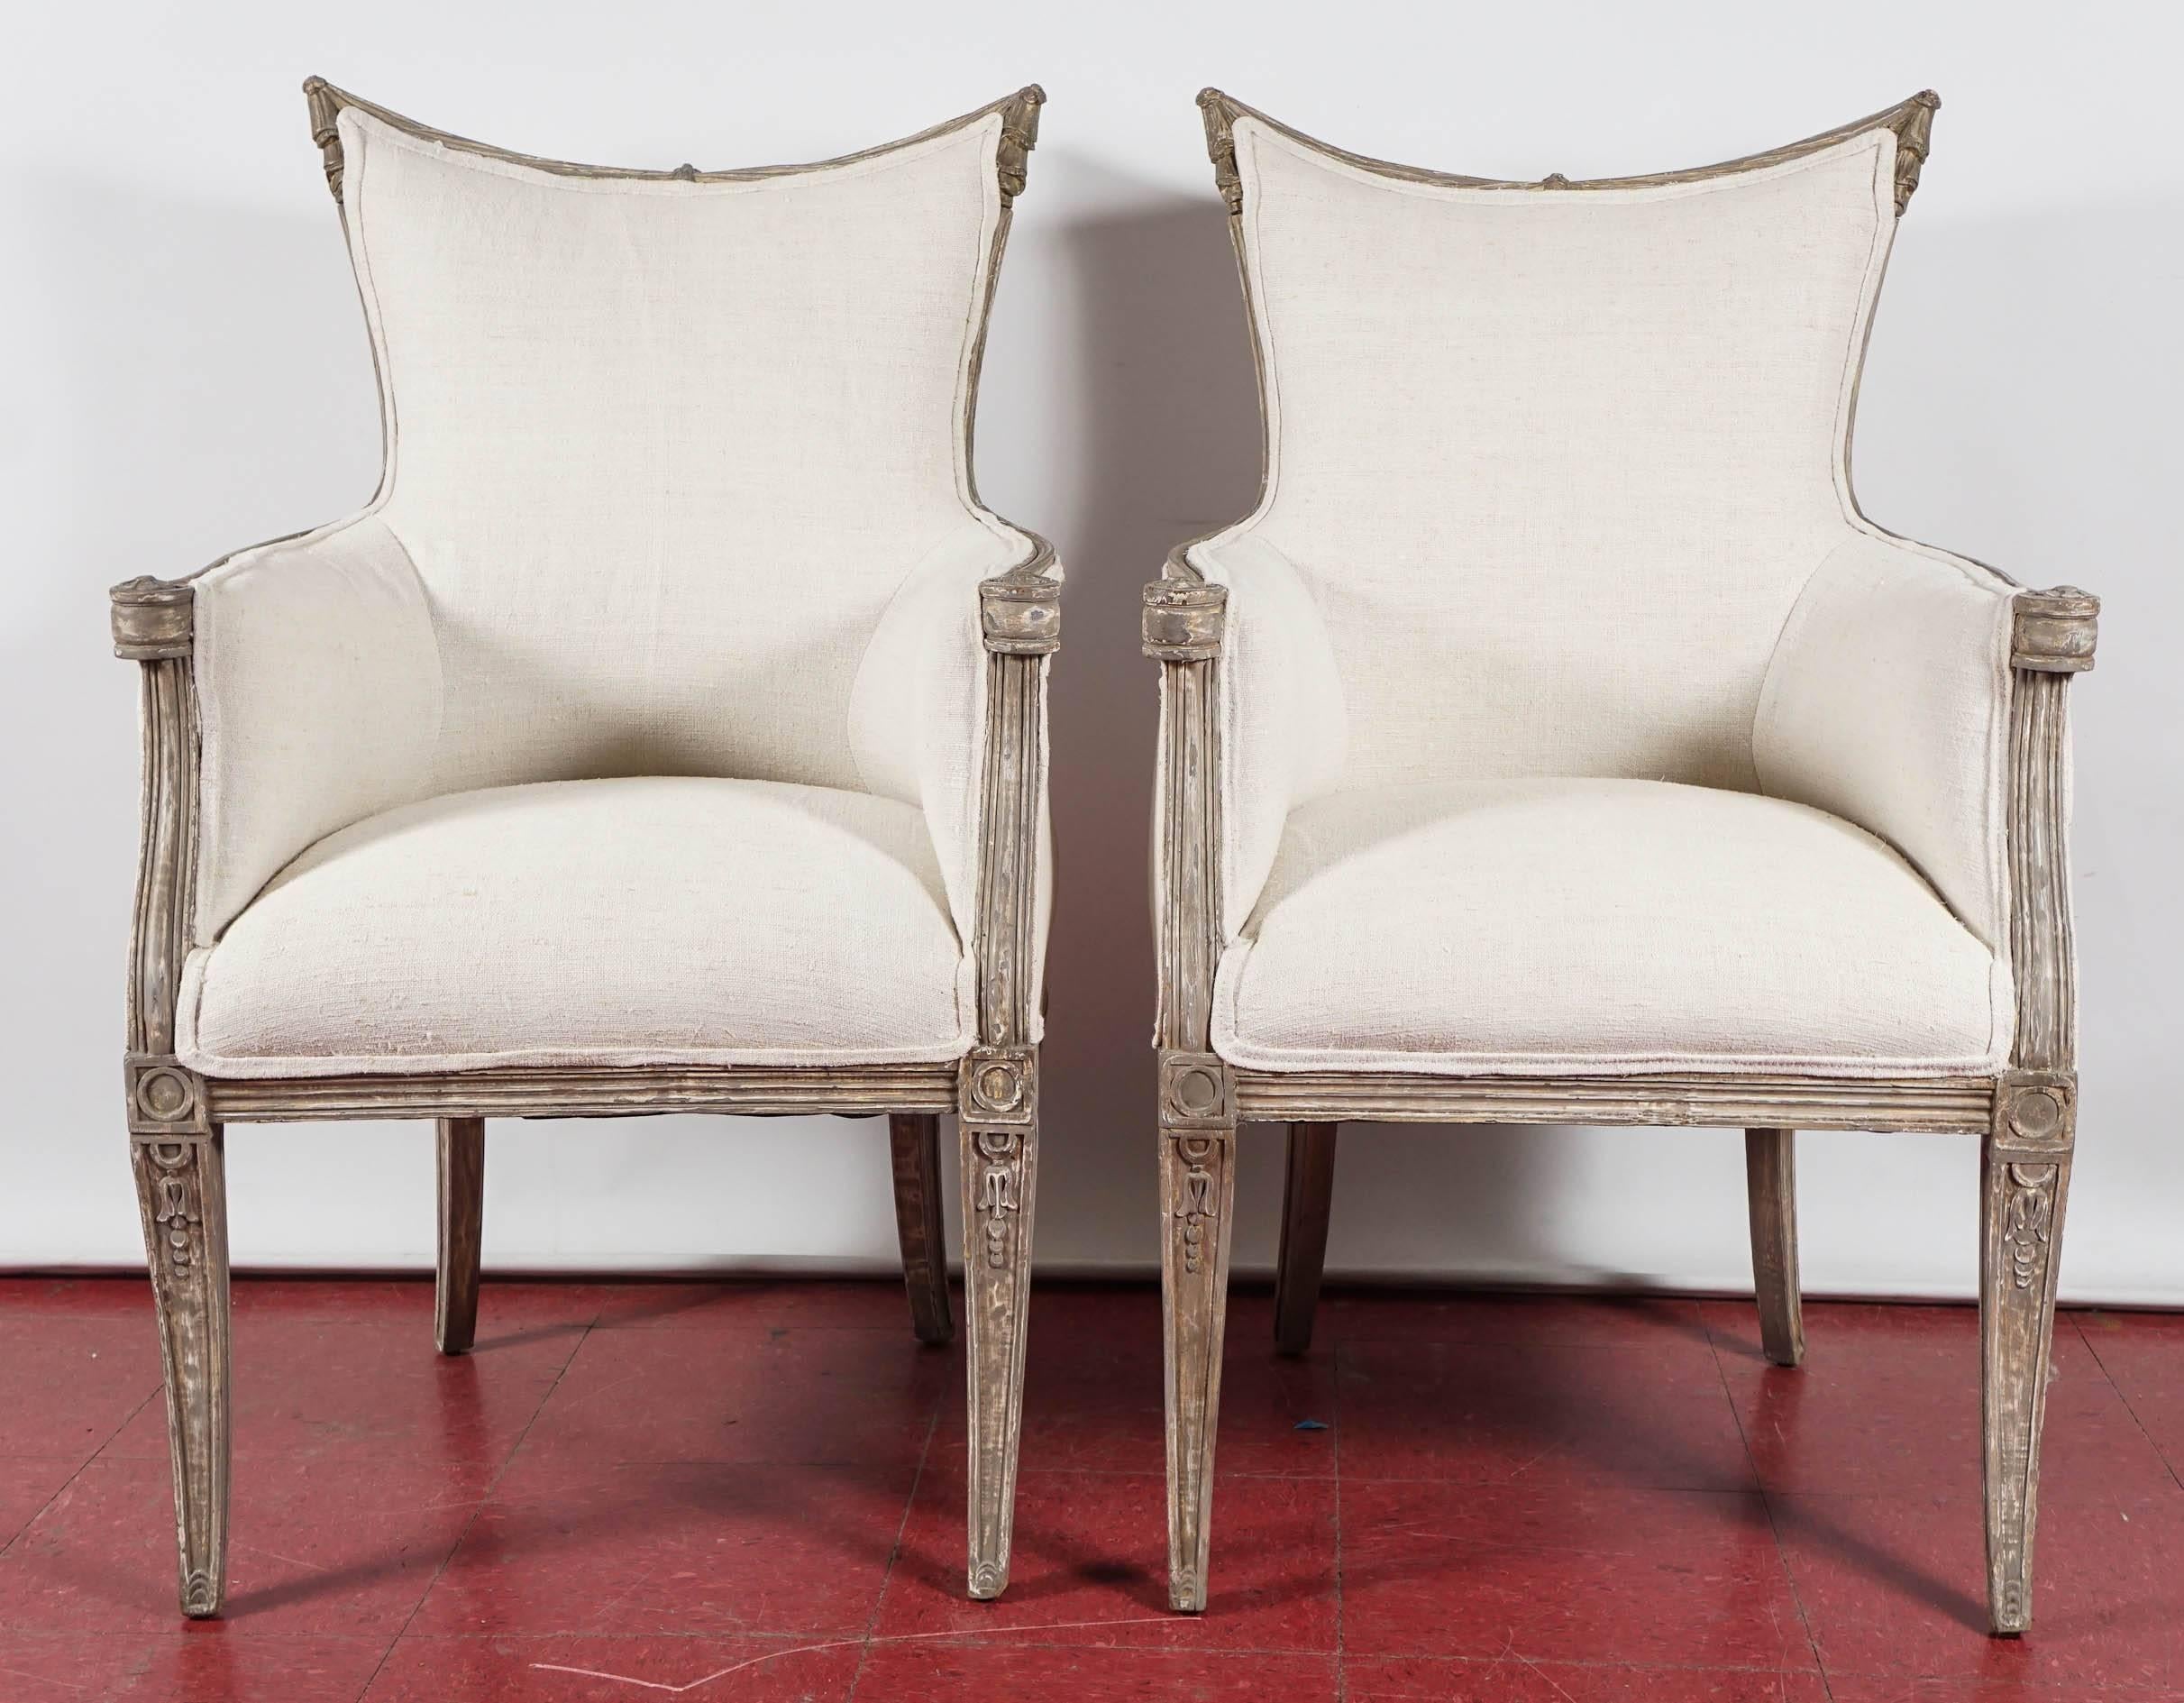 These Italian moderne burgers inspired by the Grosfeld House Hollywood Regency style are upholstered in beige linen and have hand-carved frames painted gray and are embellished with bell flowers carved within paneled front legs, while the ends of